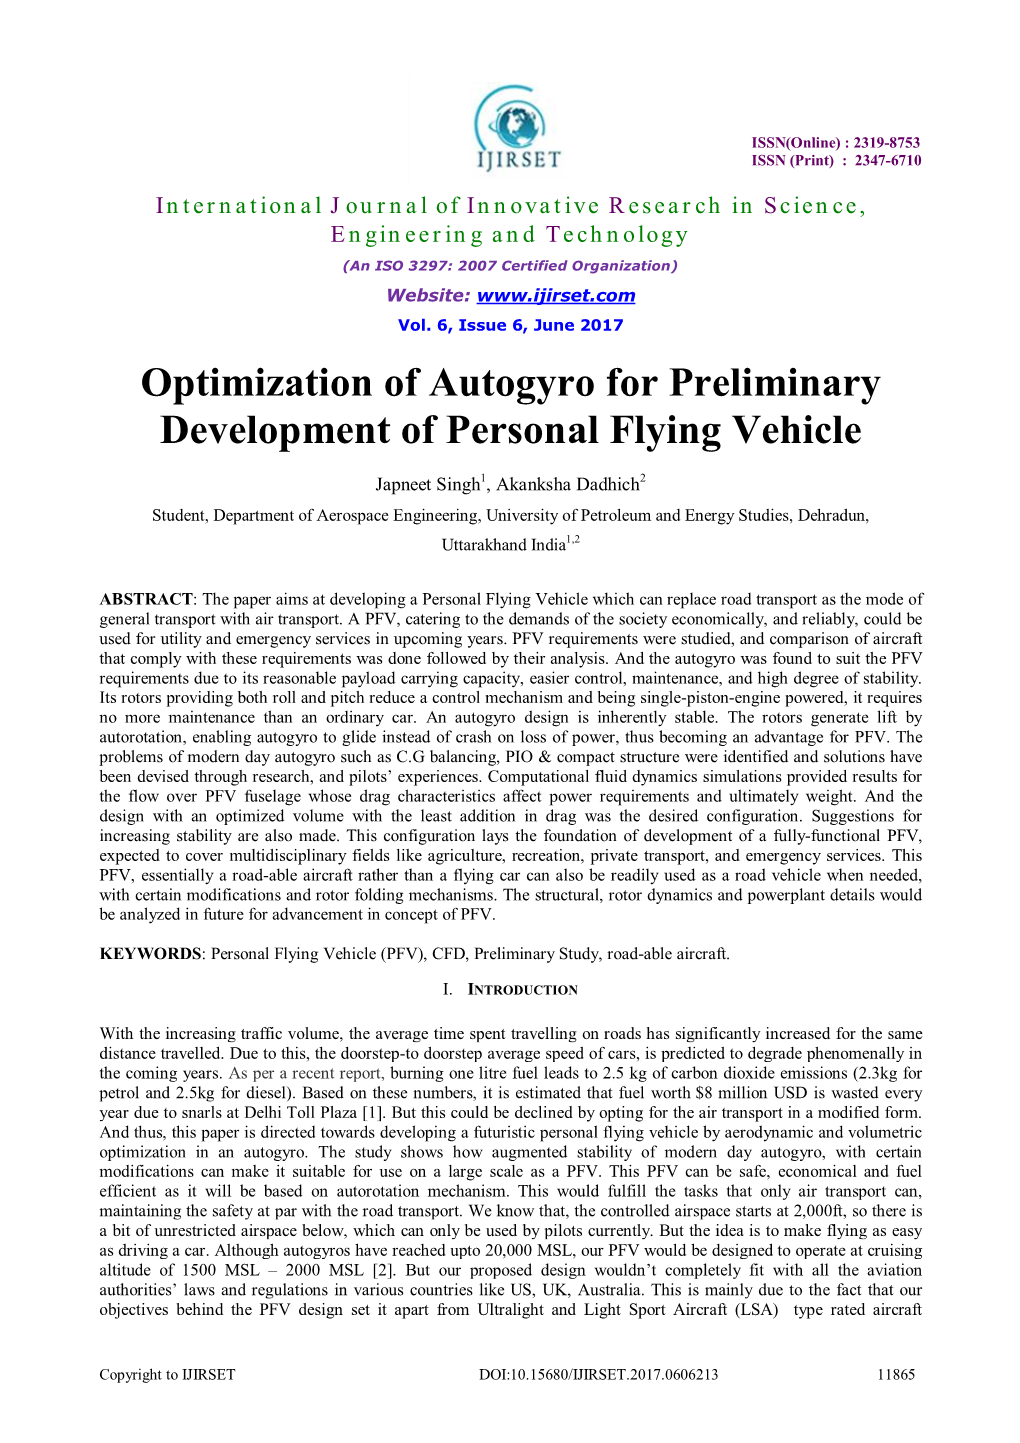 Optimization of Autogyro for Preliminary Development of Personal Flying Vehicle